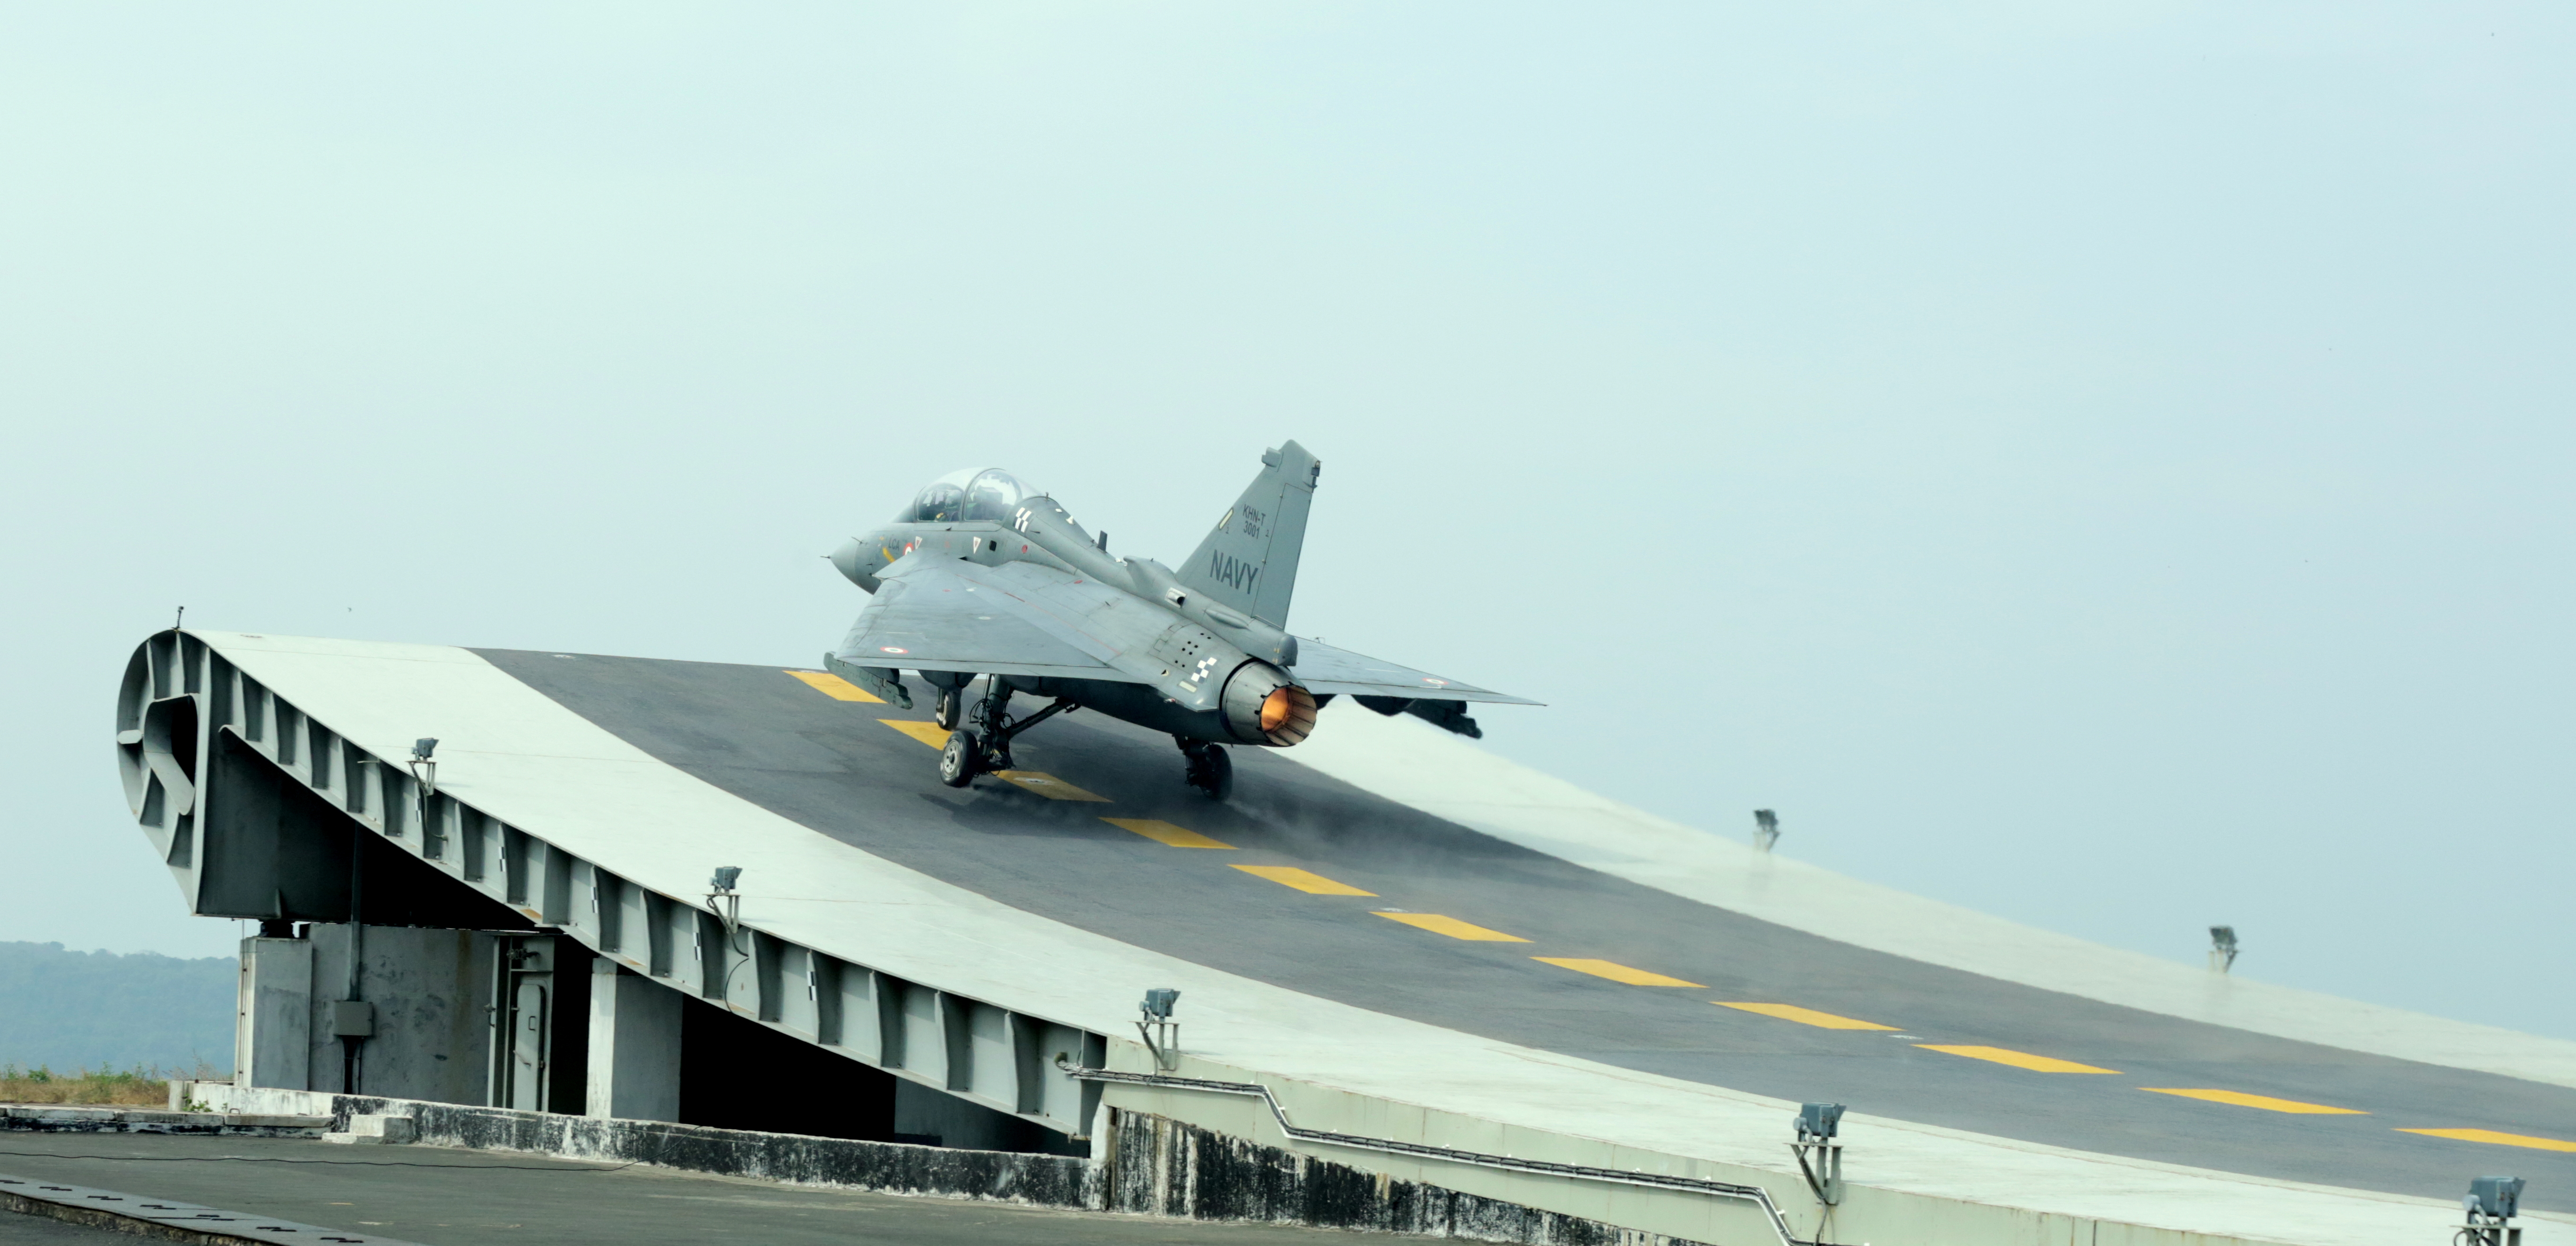 HAL_Tejas_NP-1_takes-off_from_the_Shore_Based_Test_Facility_at_INS_Hansa%2C_Goa.JPG